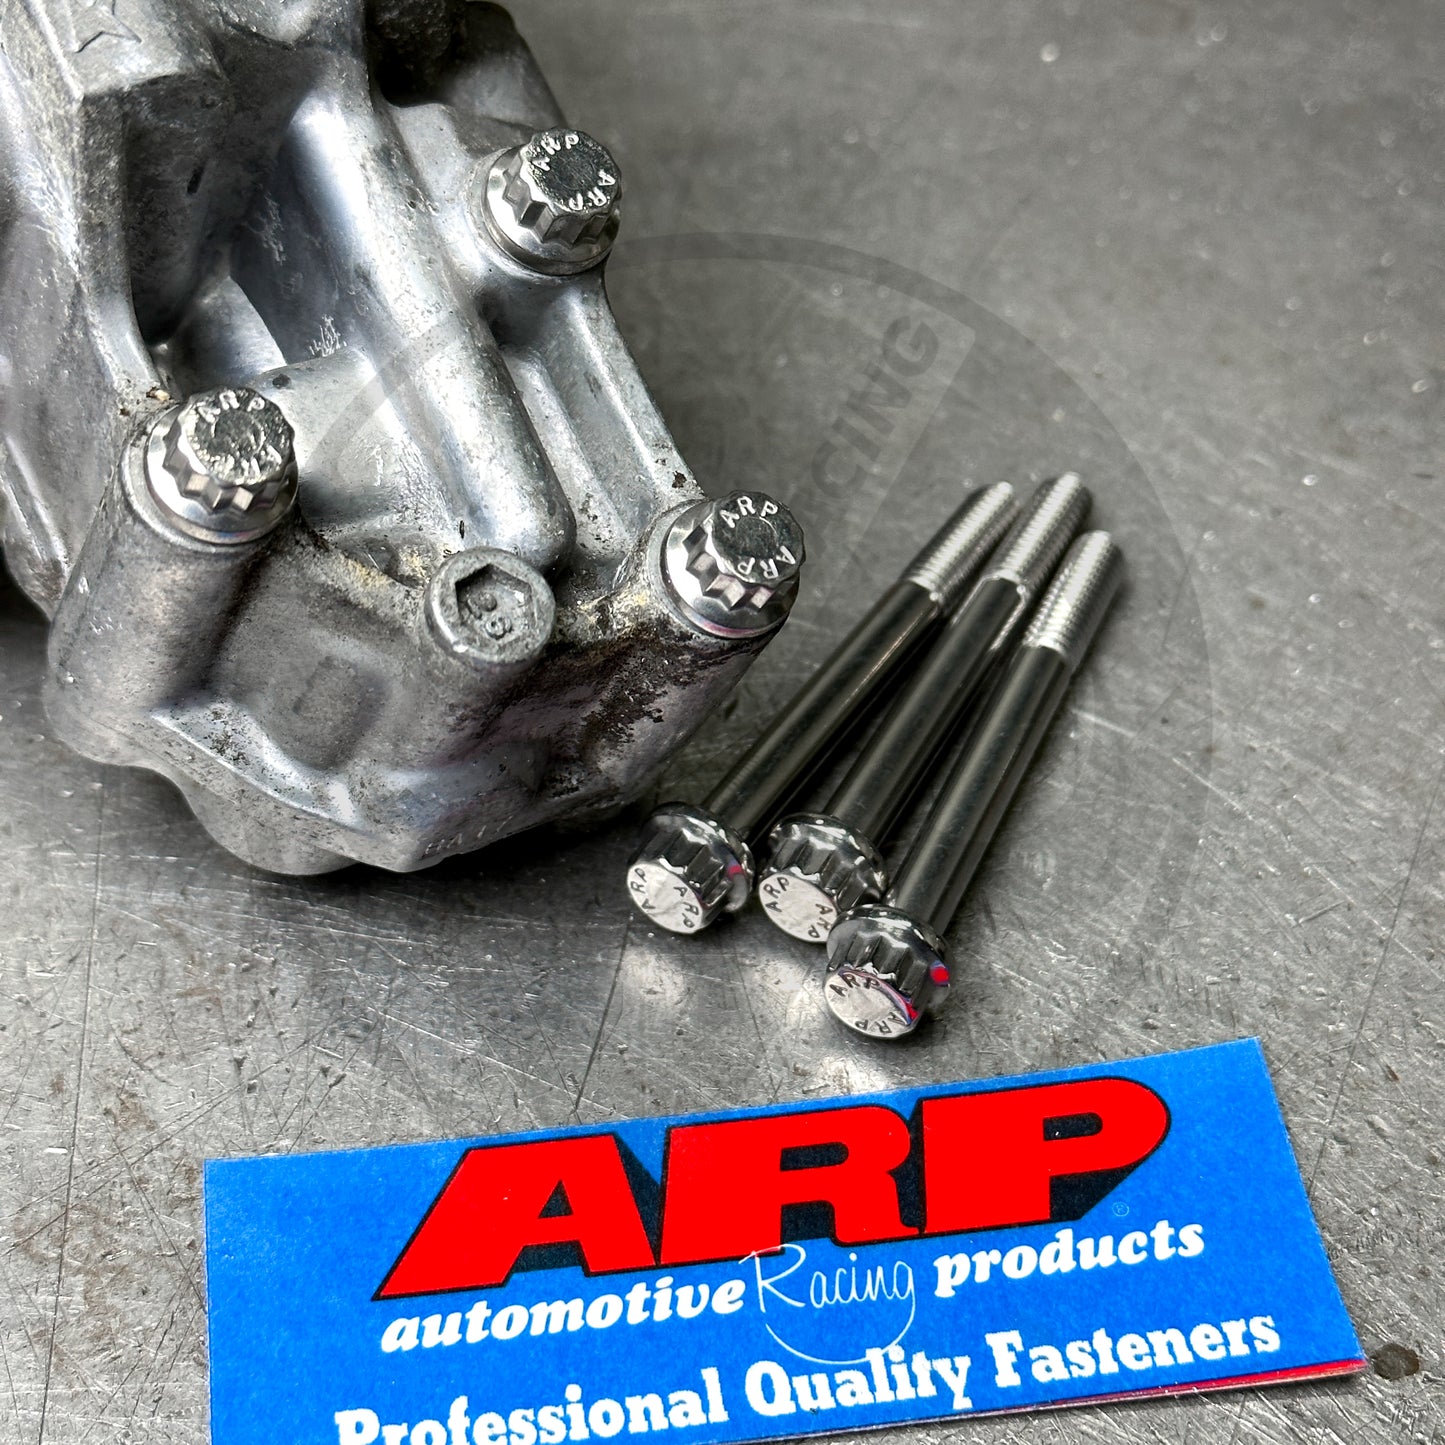 ARP Stainless Steel VTEC Solenoid Hardware Bolt Replacement for Honda Civic Acura K20 / K24 Engines